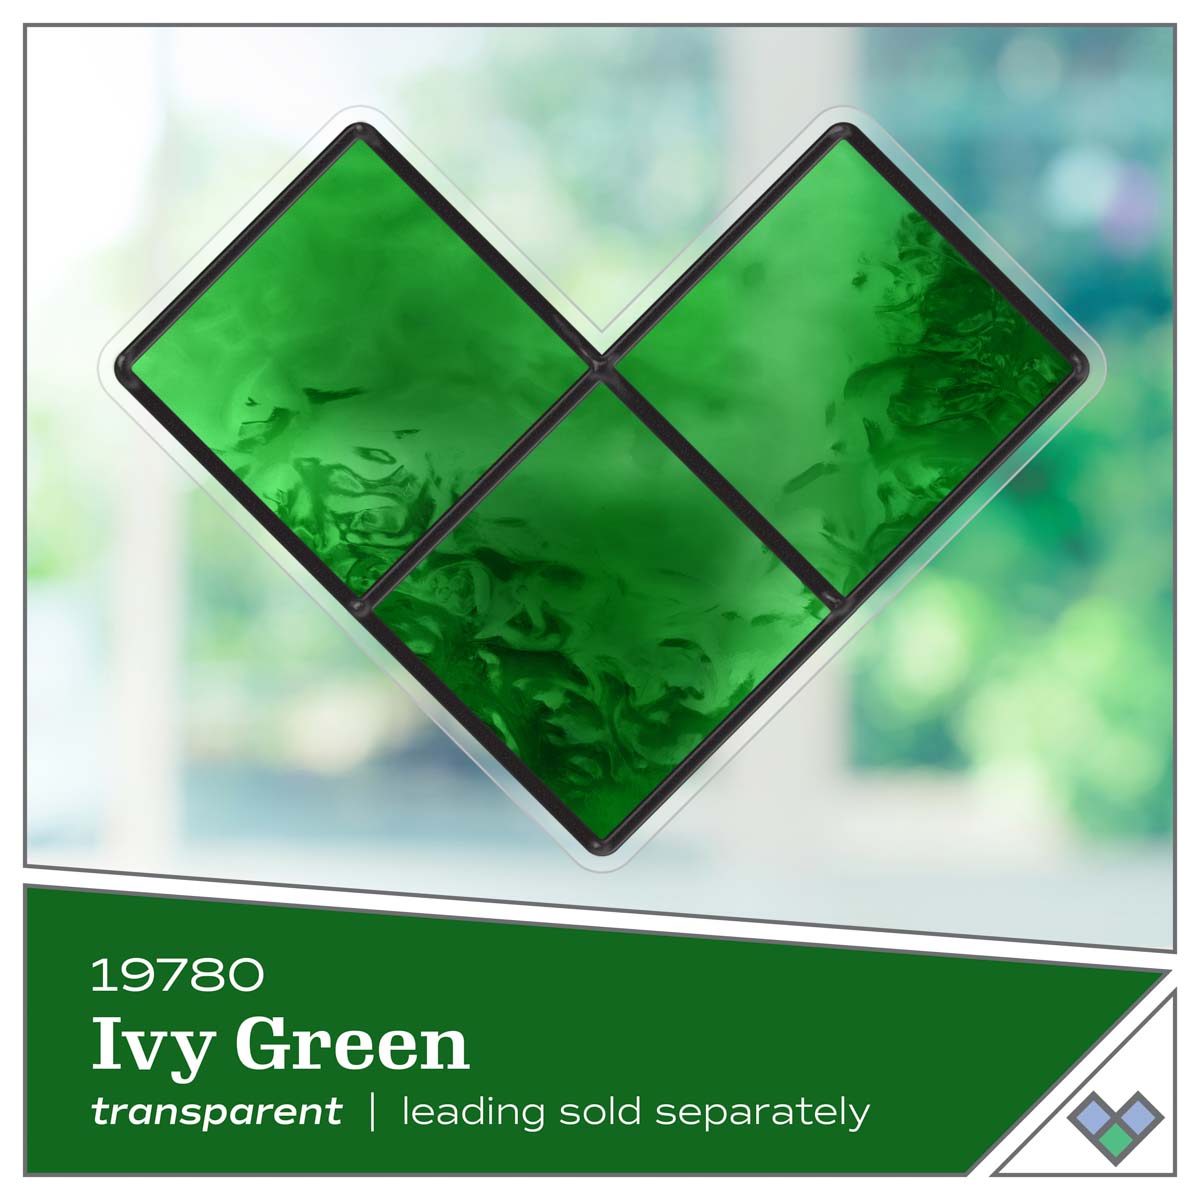 Gallery Glass ® Stained Glass Effect Paint - Ivy Green, 2 oz. - 19780